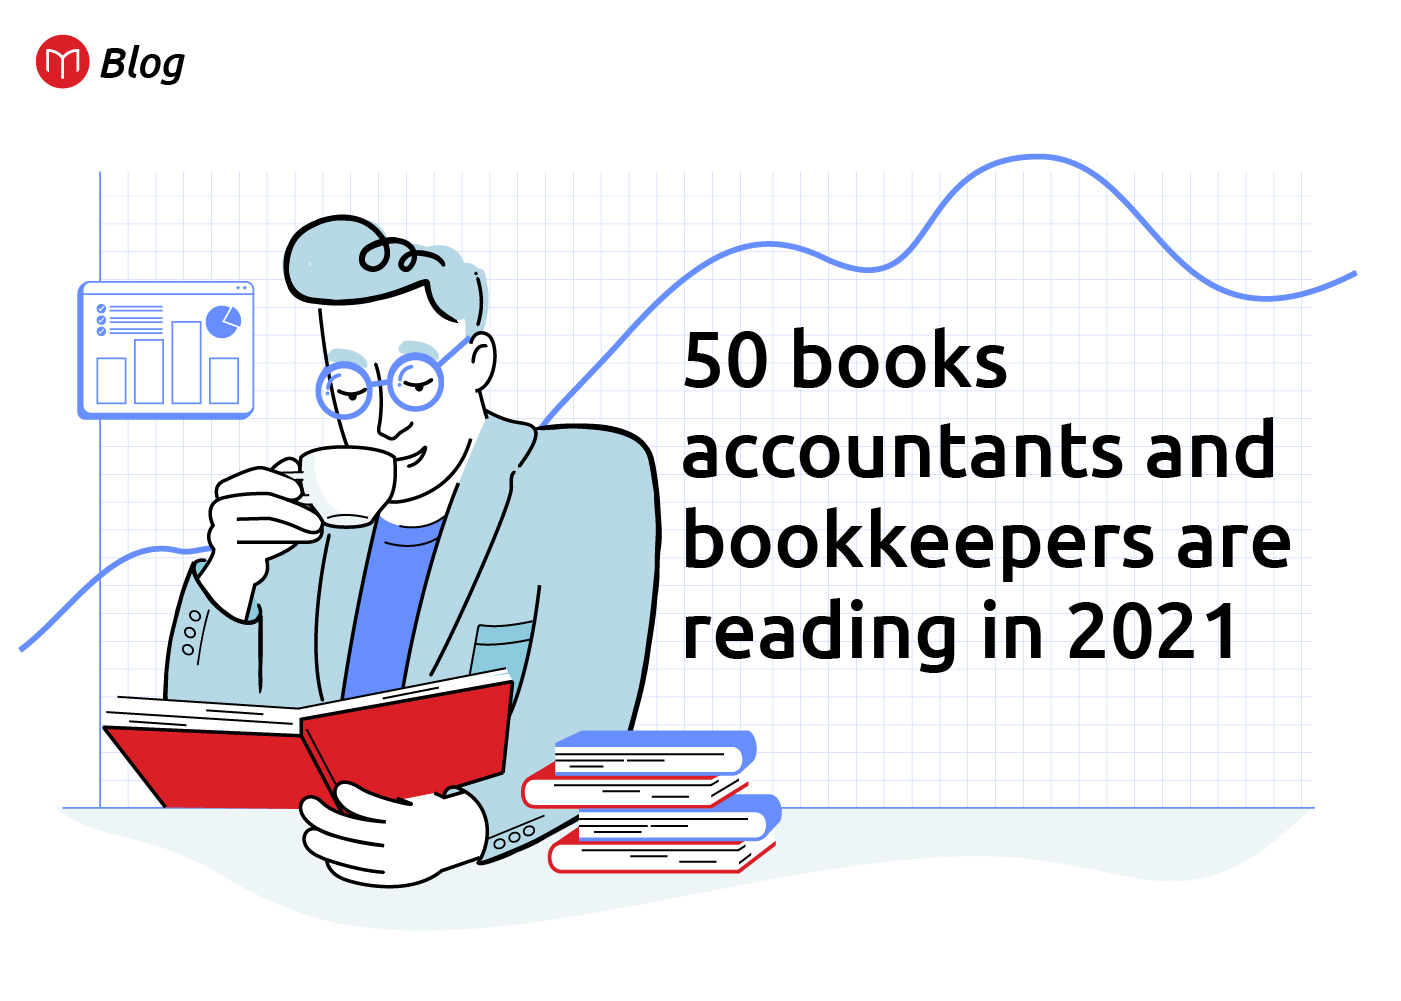 50 Business Books Accountants and Bookkeepers are reading in 2021